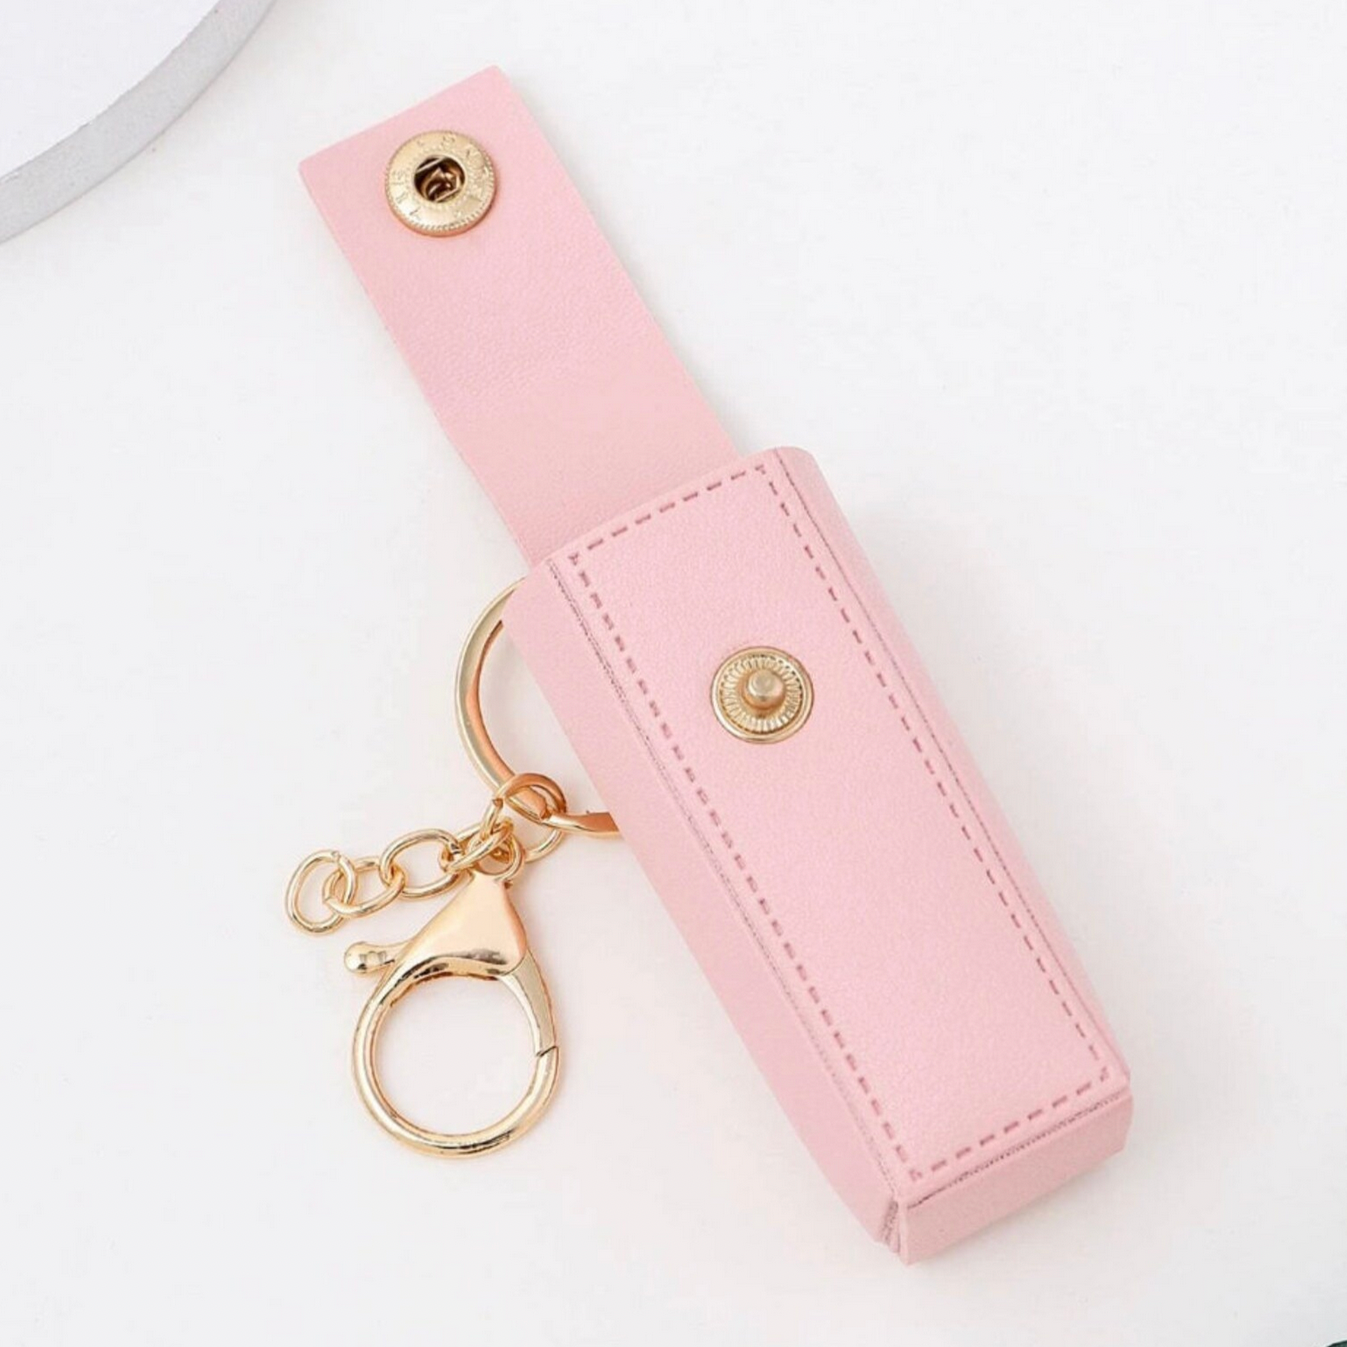 Personalised Faux Leather Lipstick Holder Lip Balm Keychain Bag Charm